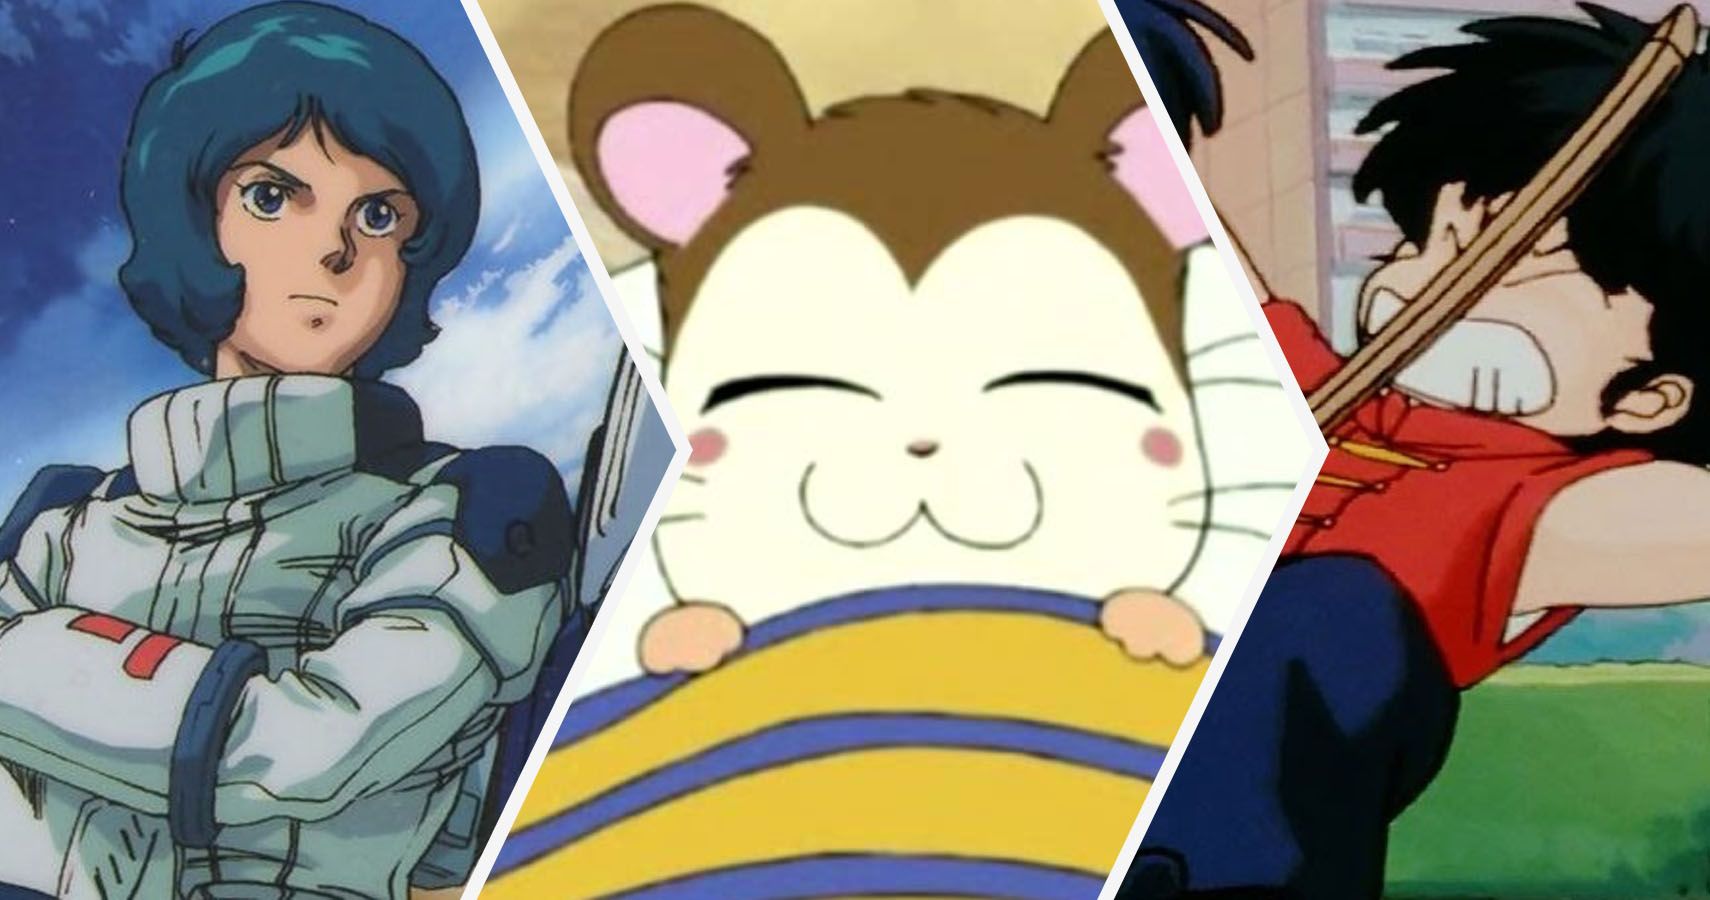 5 Anime Toonami Should Have Aired (And 5 They Shouldn't Have)